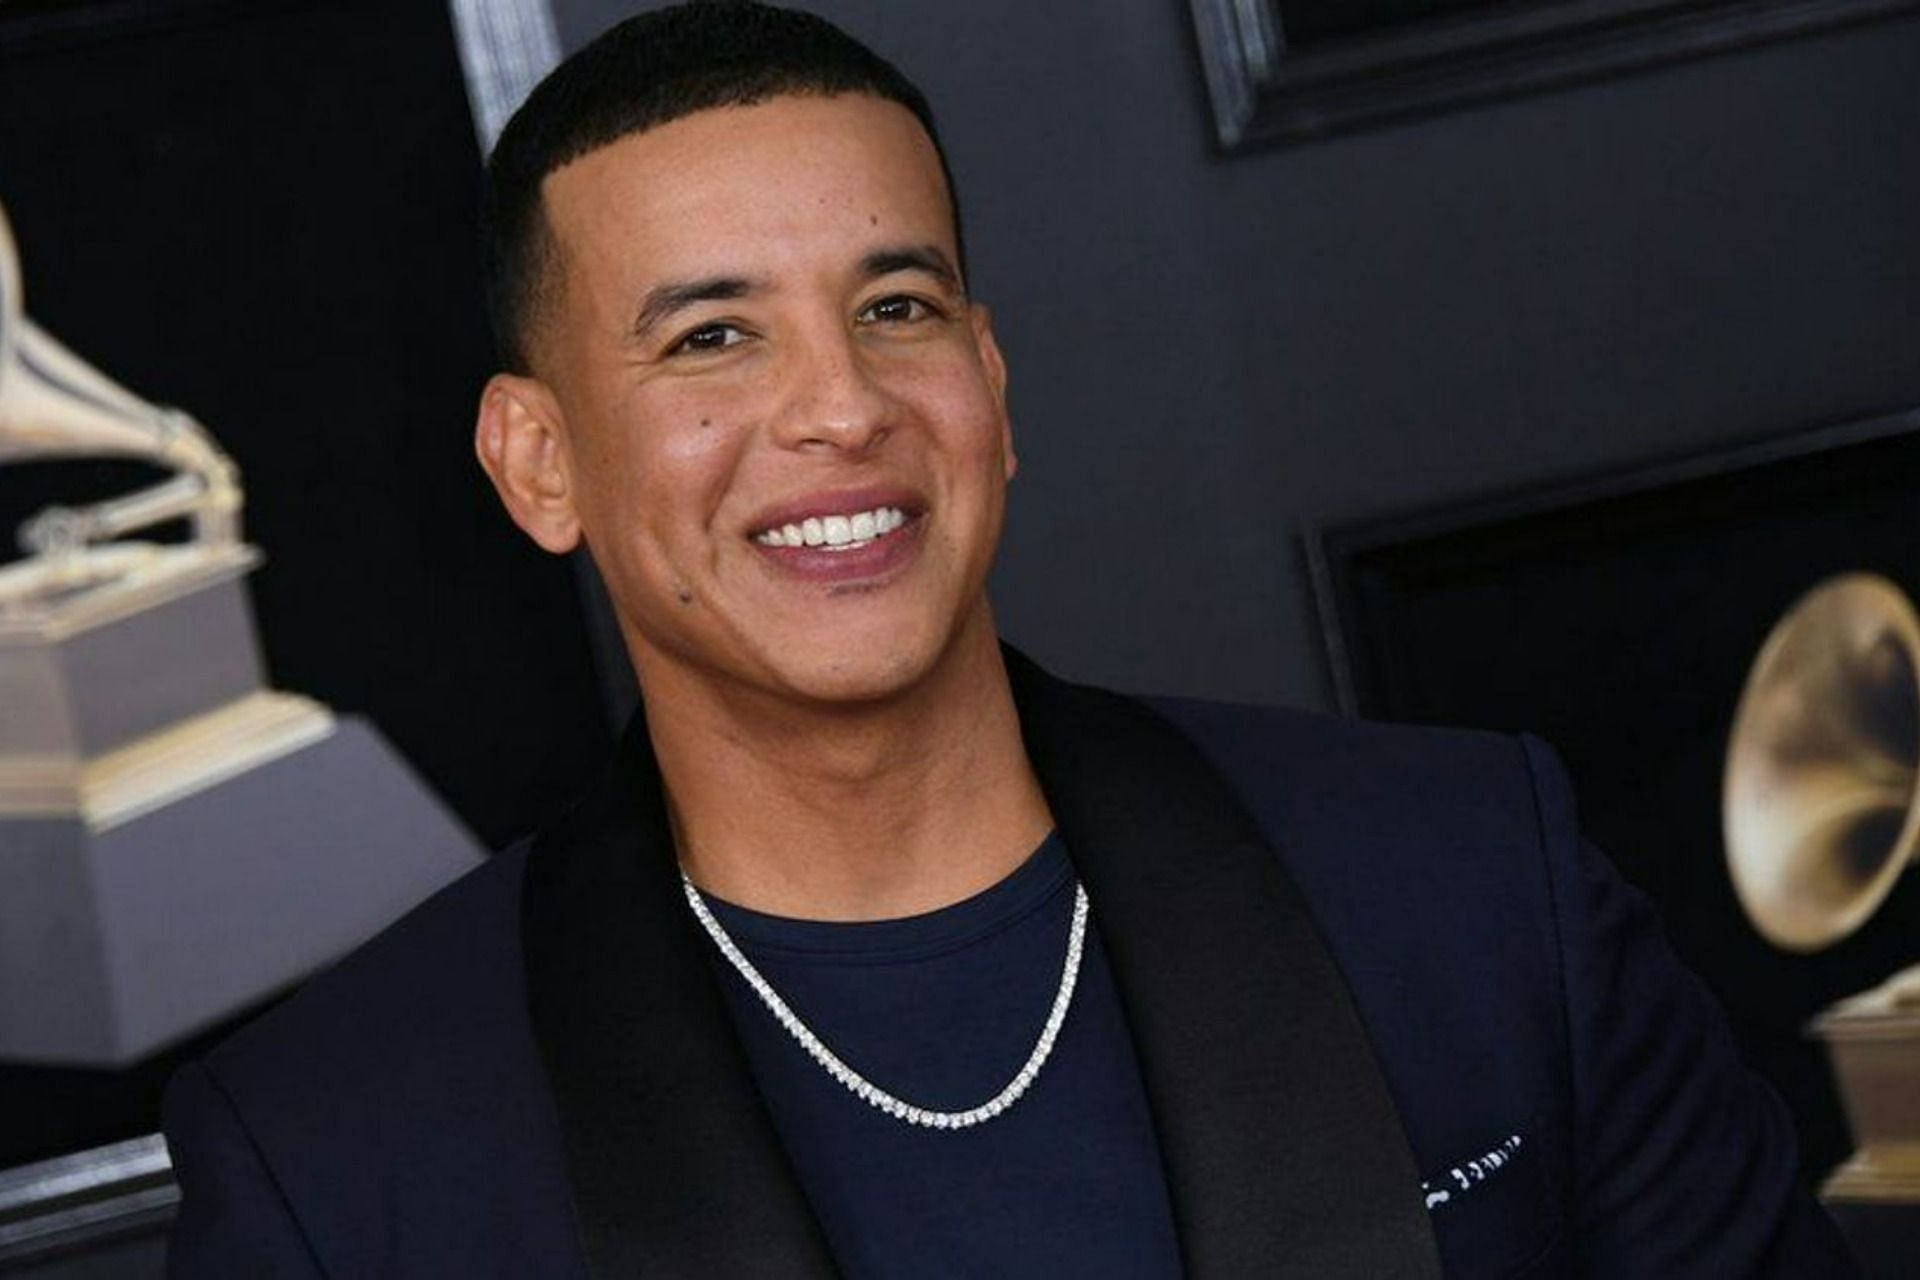 Daddy Yankee announces retirement after 32 years of creating music (Image via AFP/Getty Images)